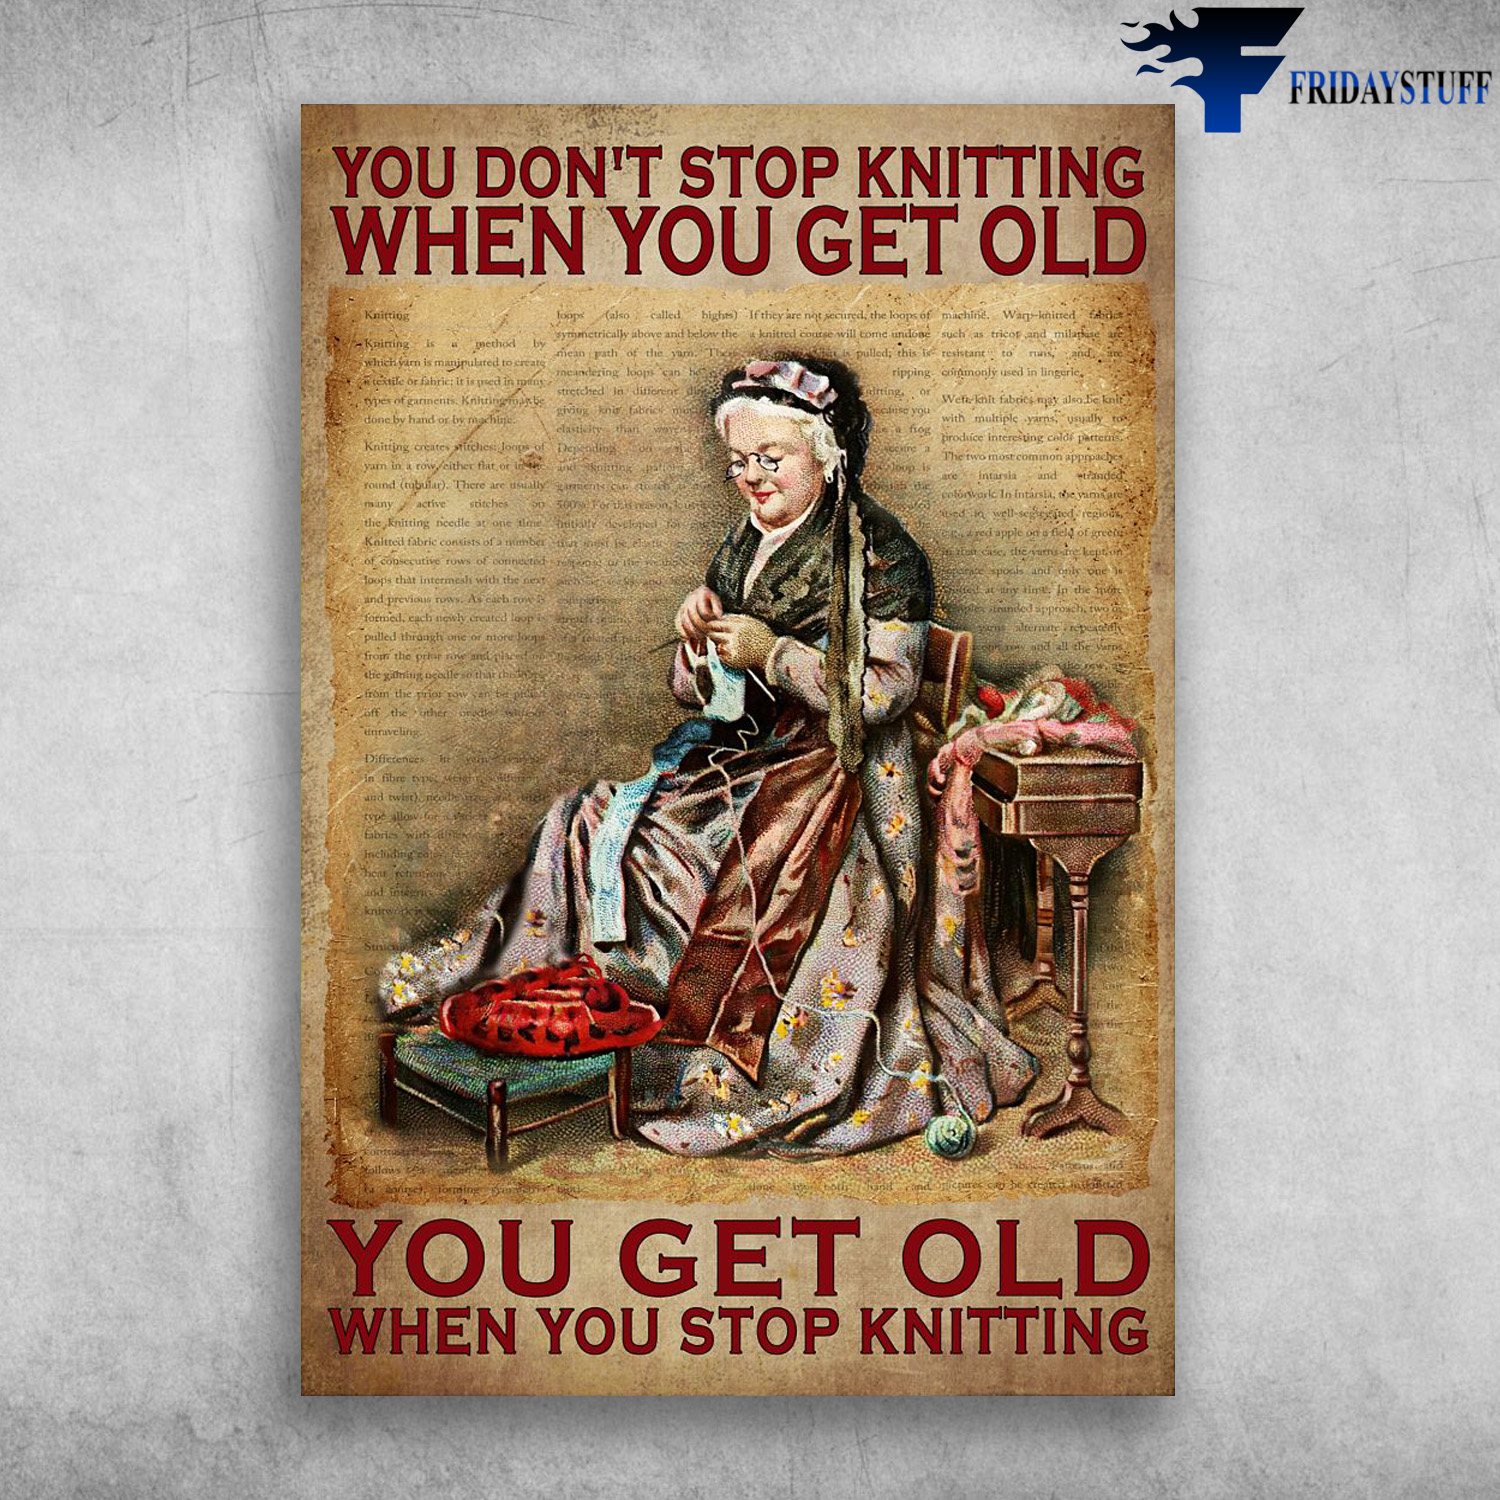 Old Lady Knitting - You Don't Stop Knitting When You Get Old, You Get Old When You Stop Knitting